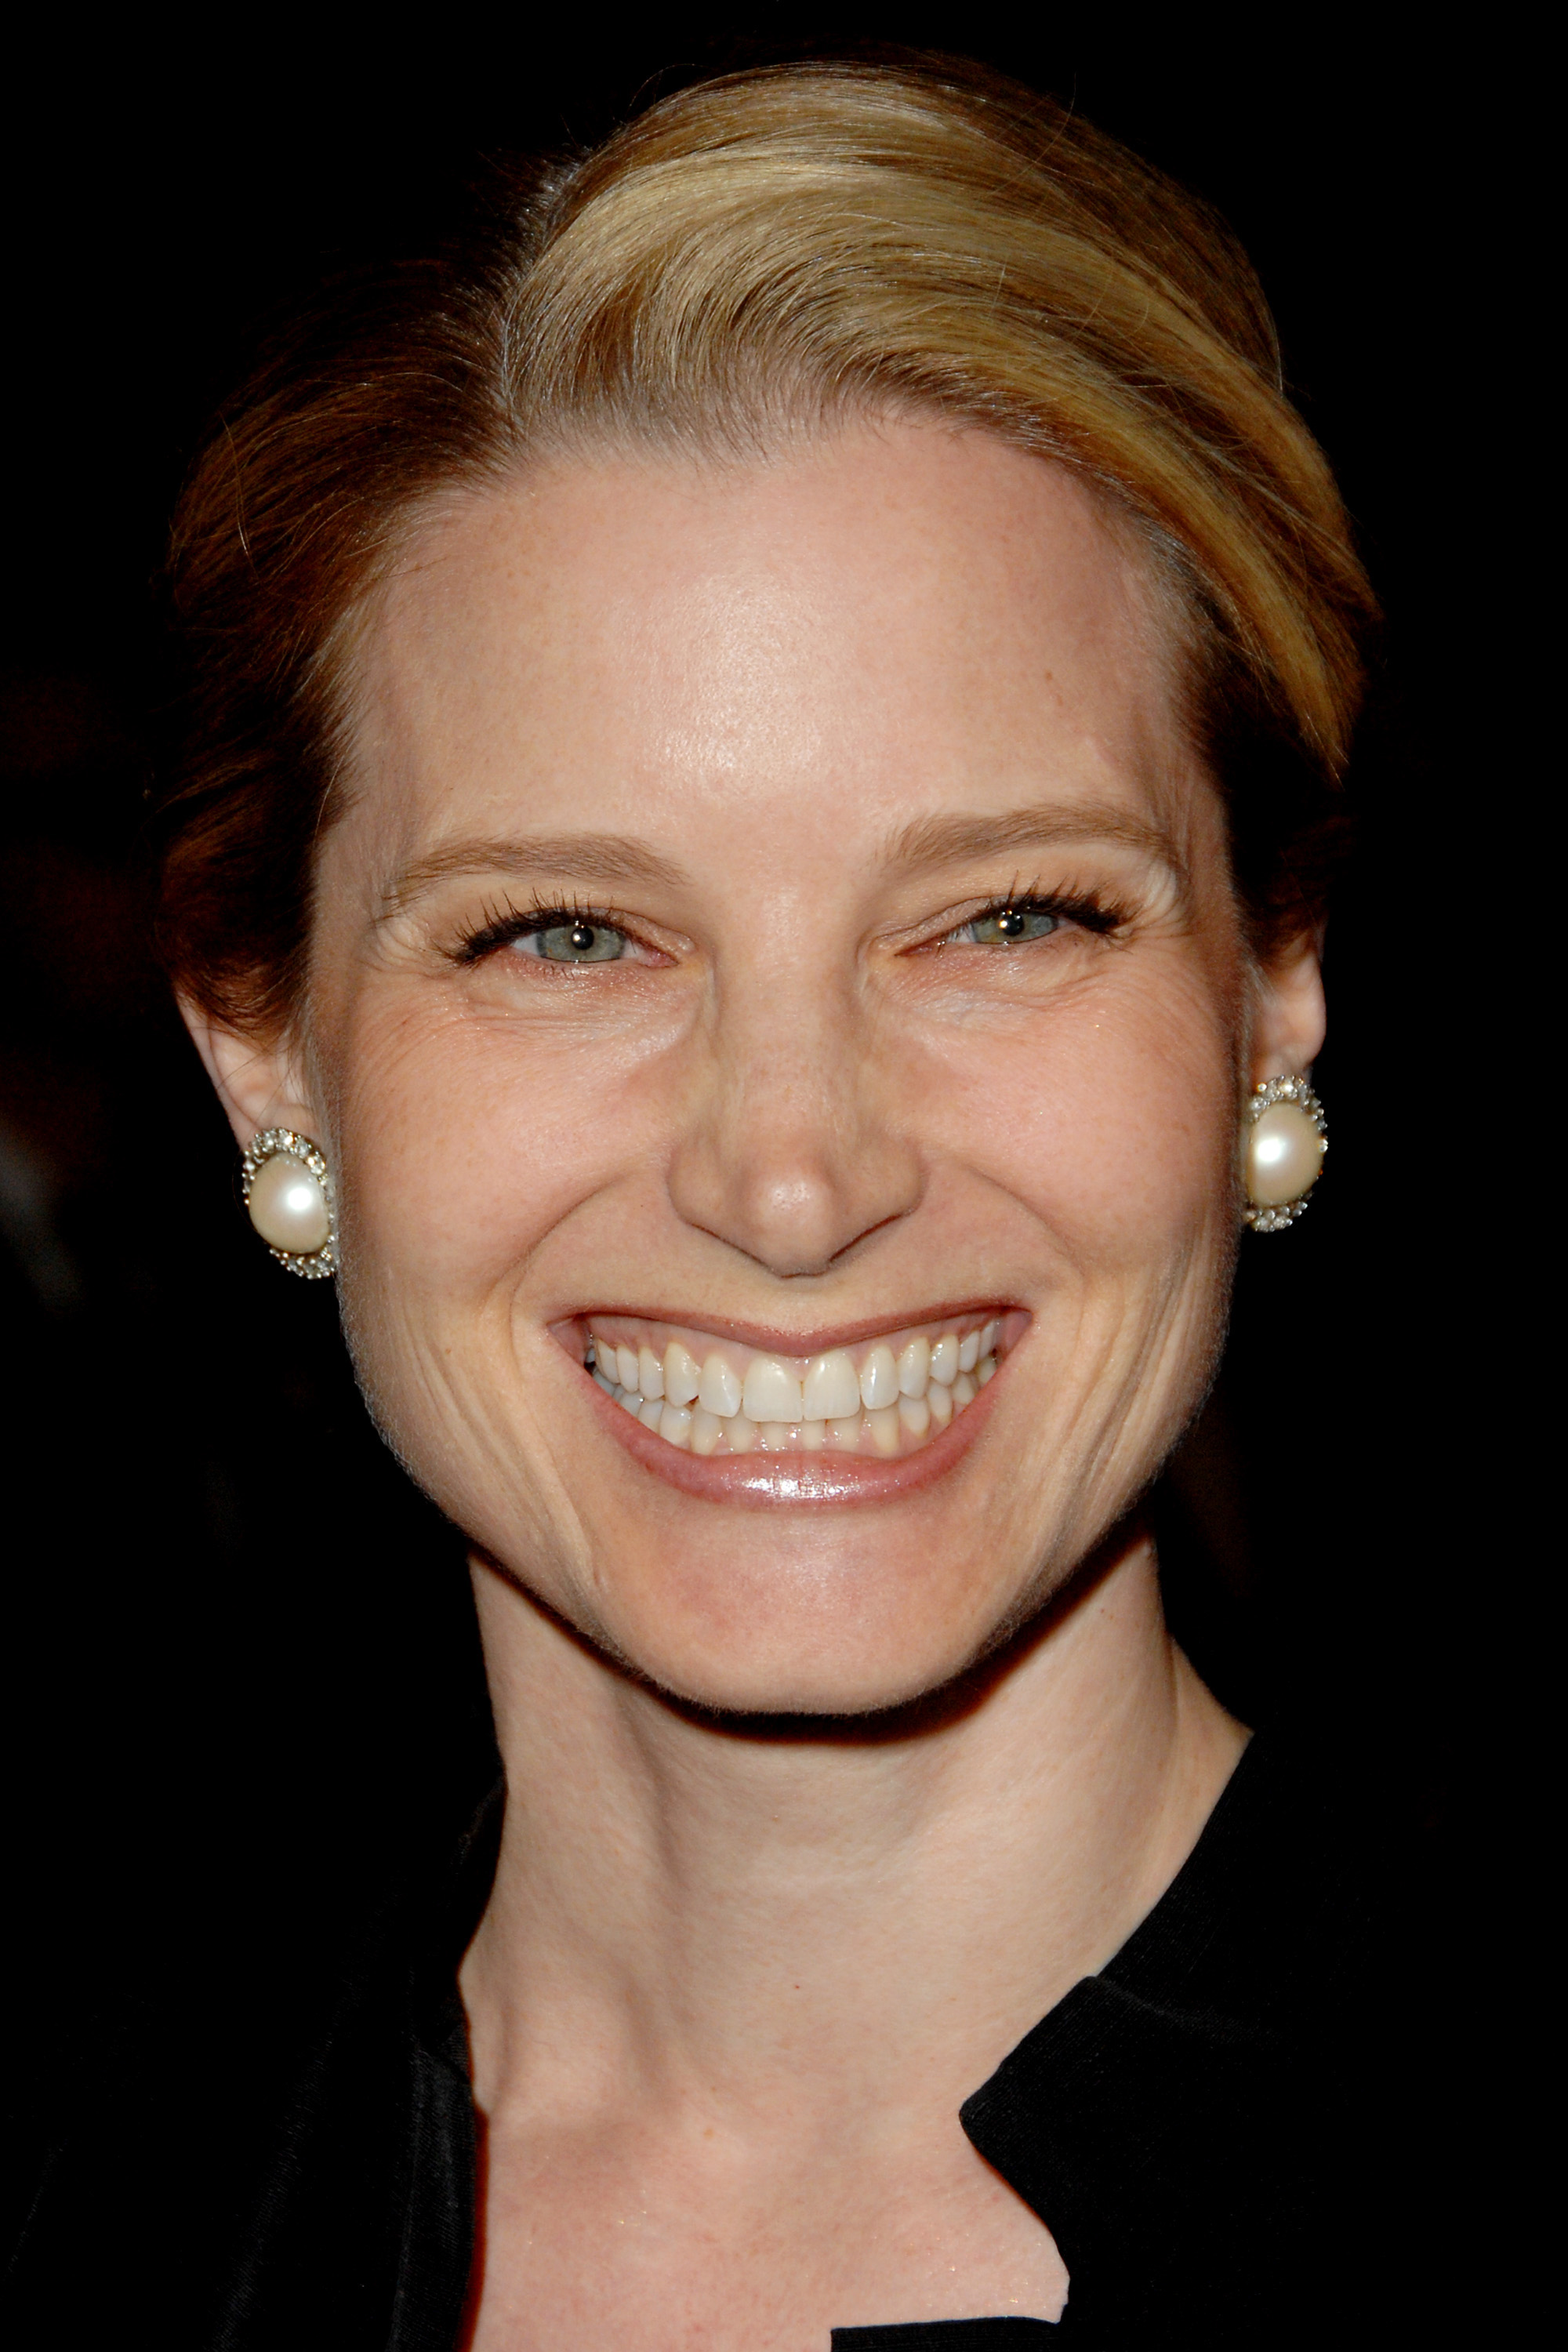 Bridget Fonda during the 18th Annual Palm Springs International Film Festival Awards Gala at Palm Springs Convention Center on January 6, 2007 in Palm Springs, California. | Source: Getty Images